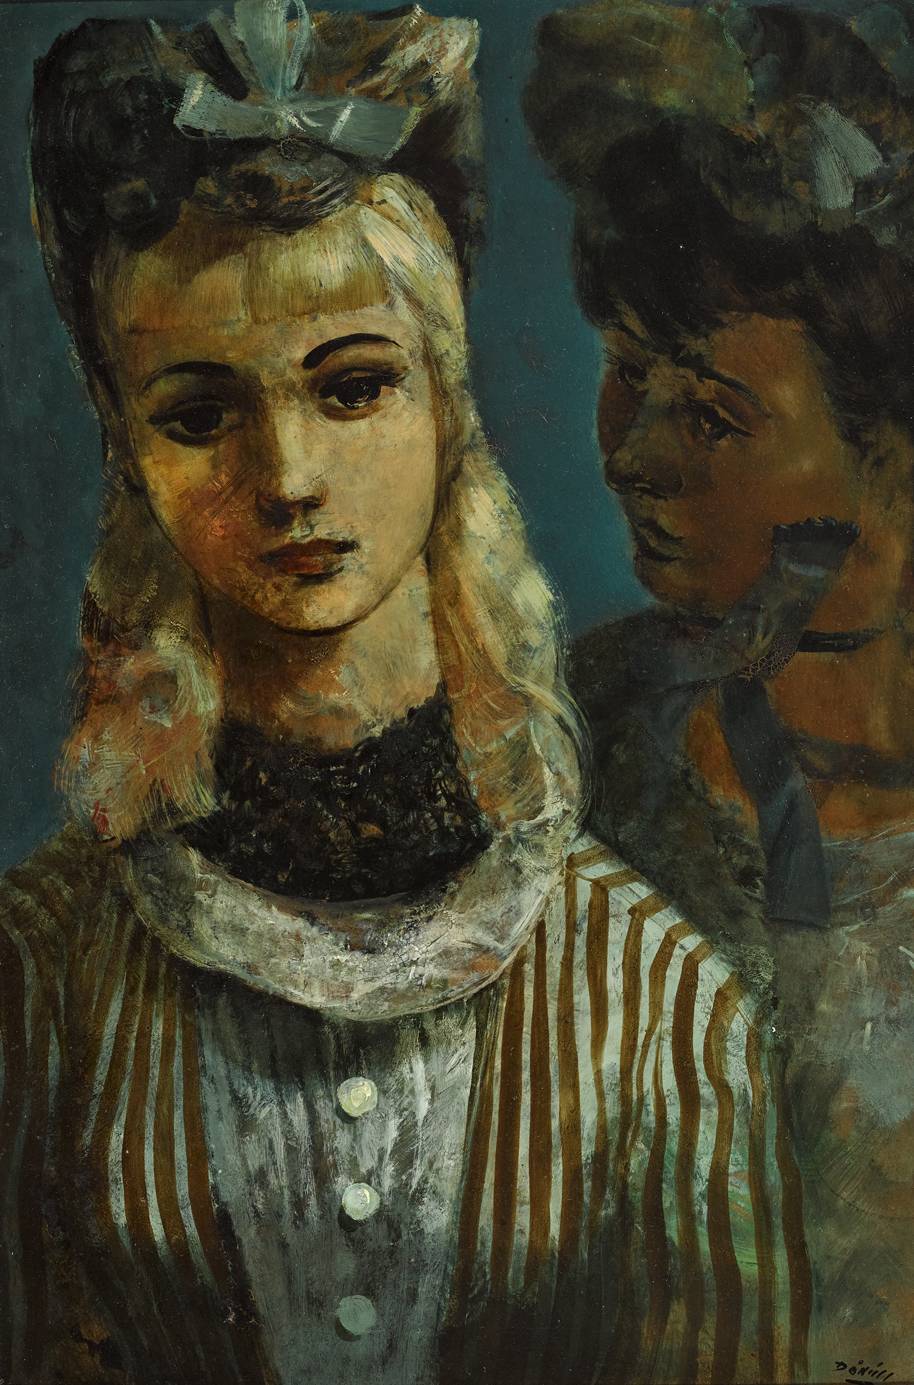 STAGE GIRLS by Daniel O'Neill sold for 21,000 at Whyte's Auctions